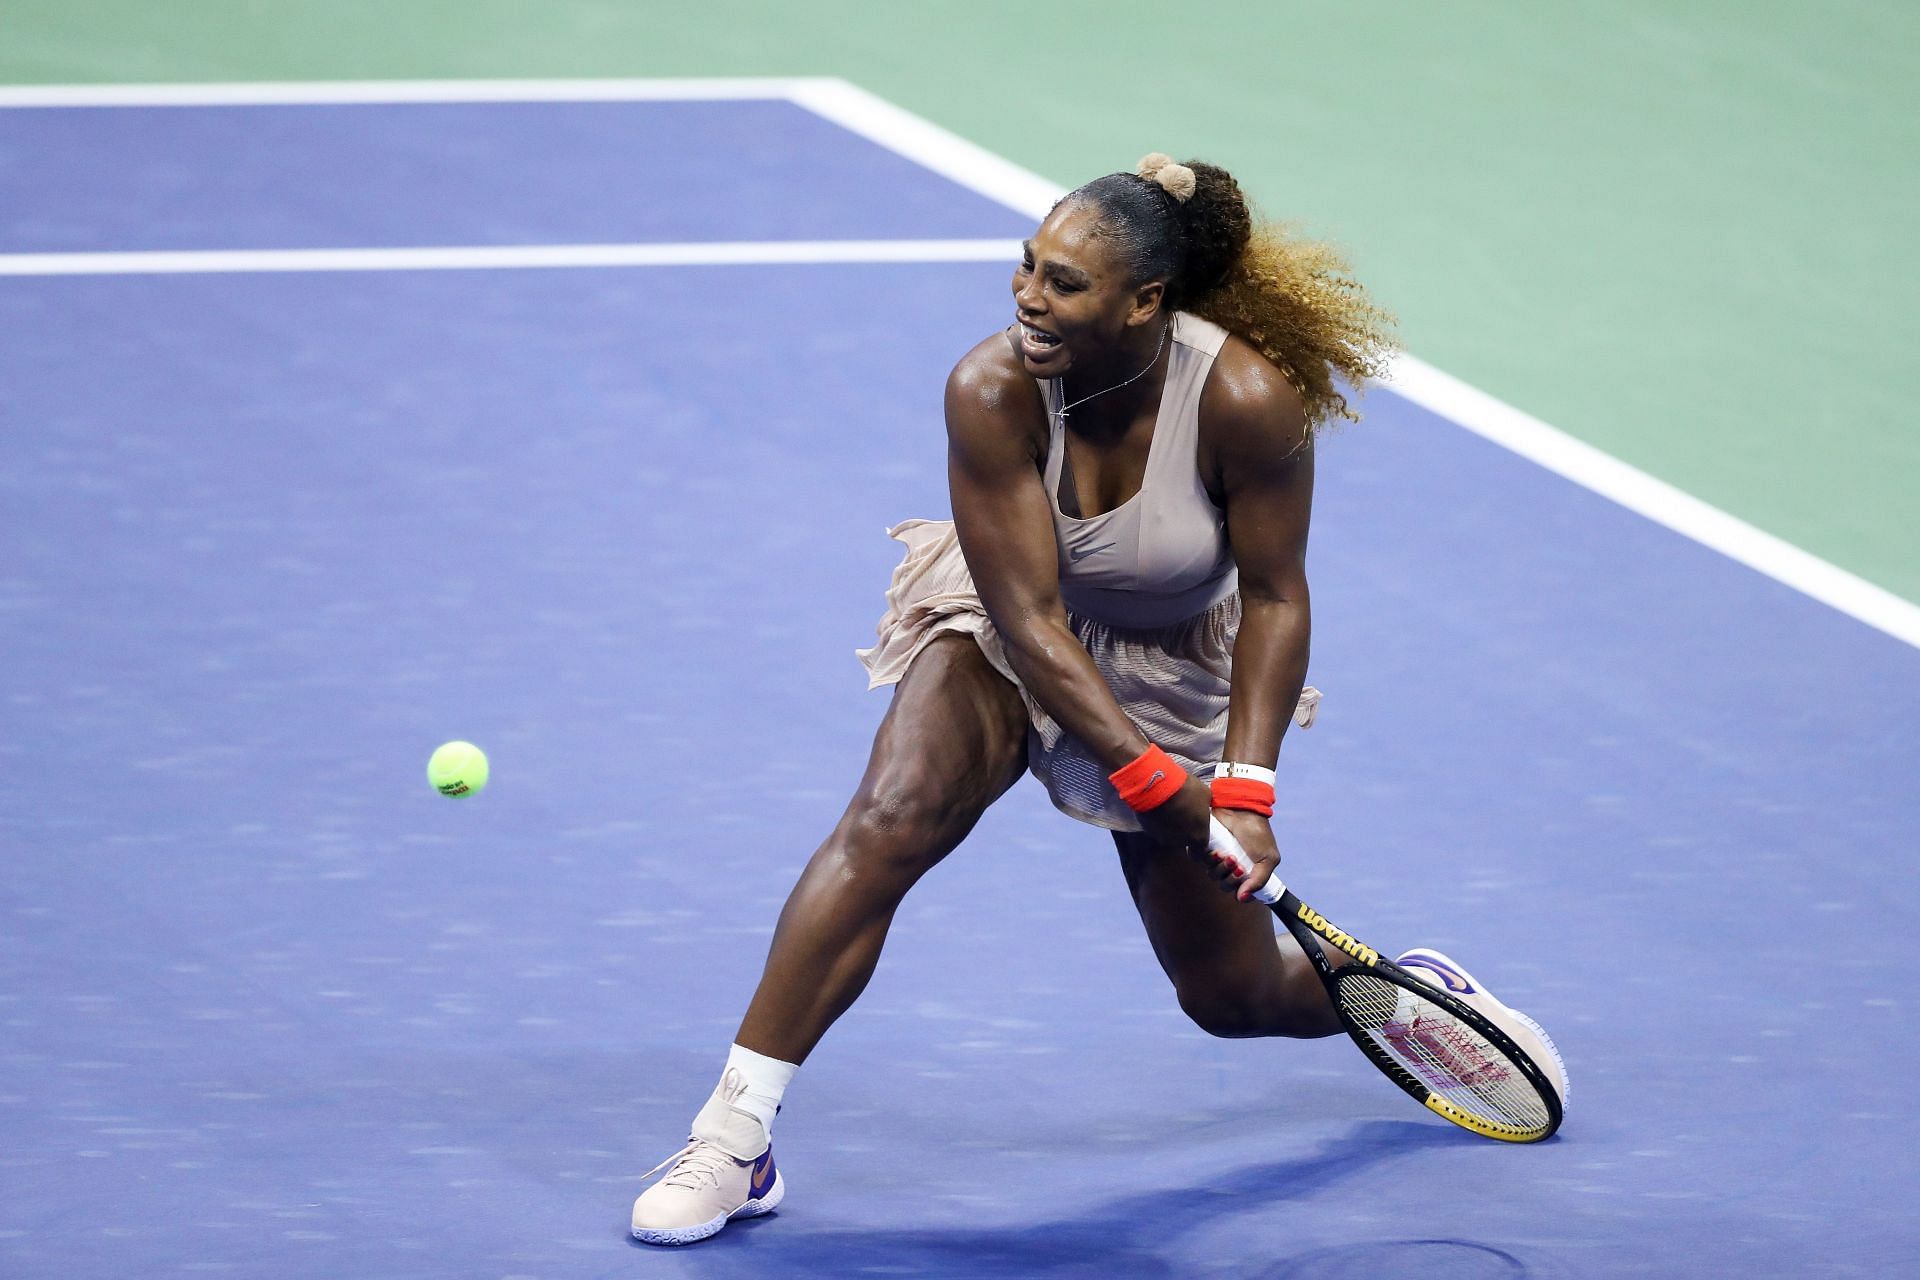 Serena Williams in action at the 2020 US Open